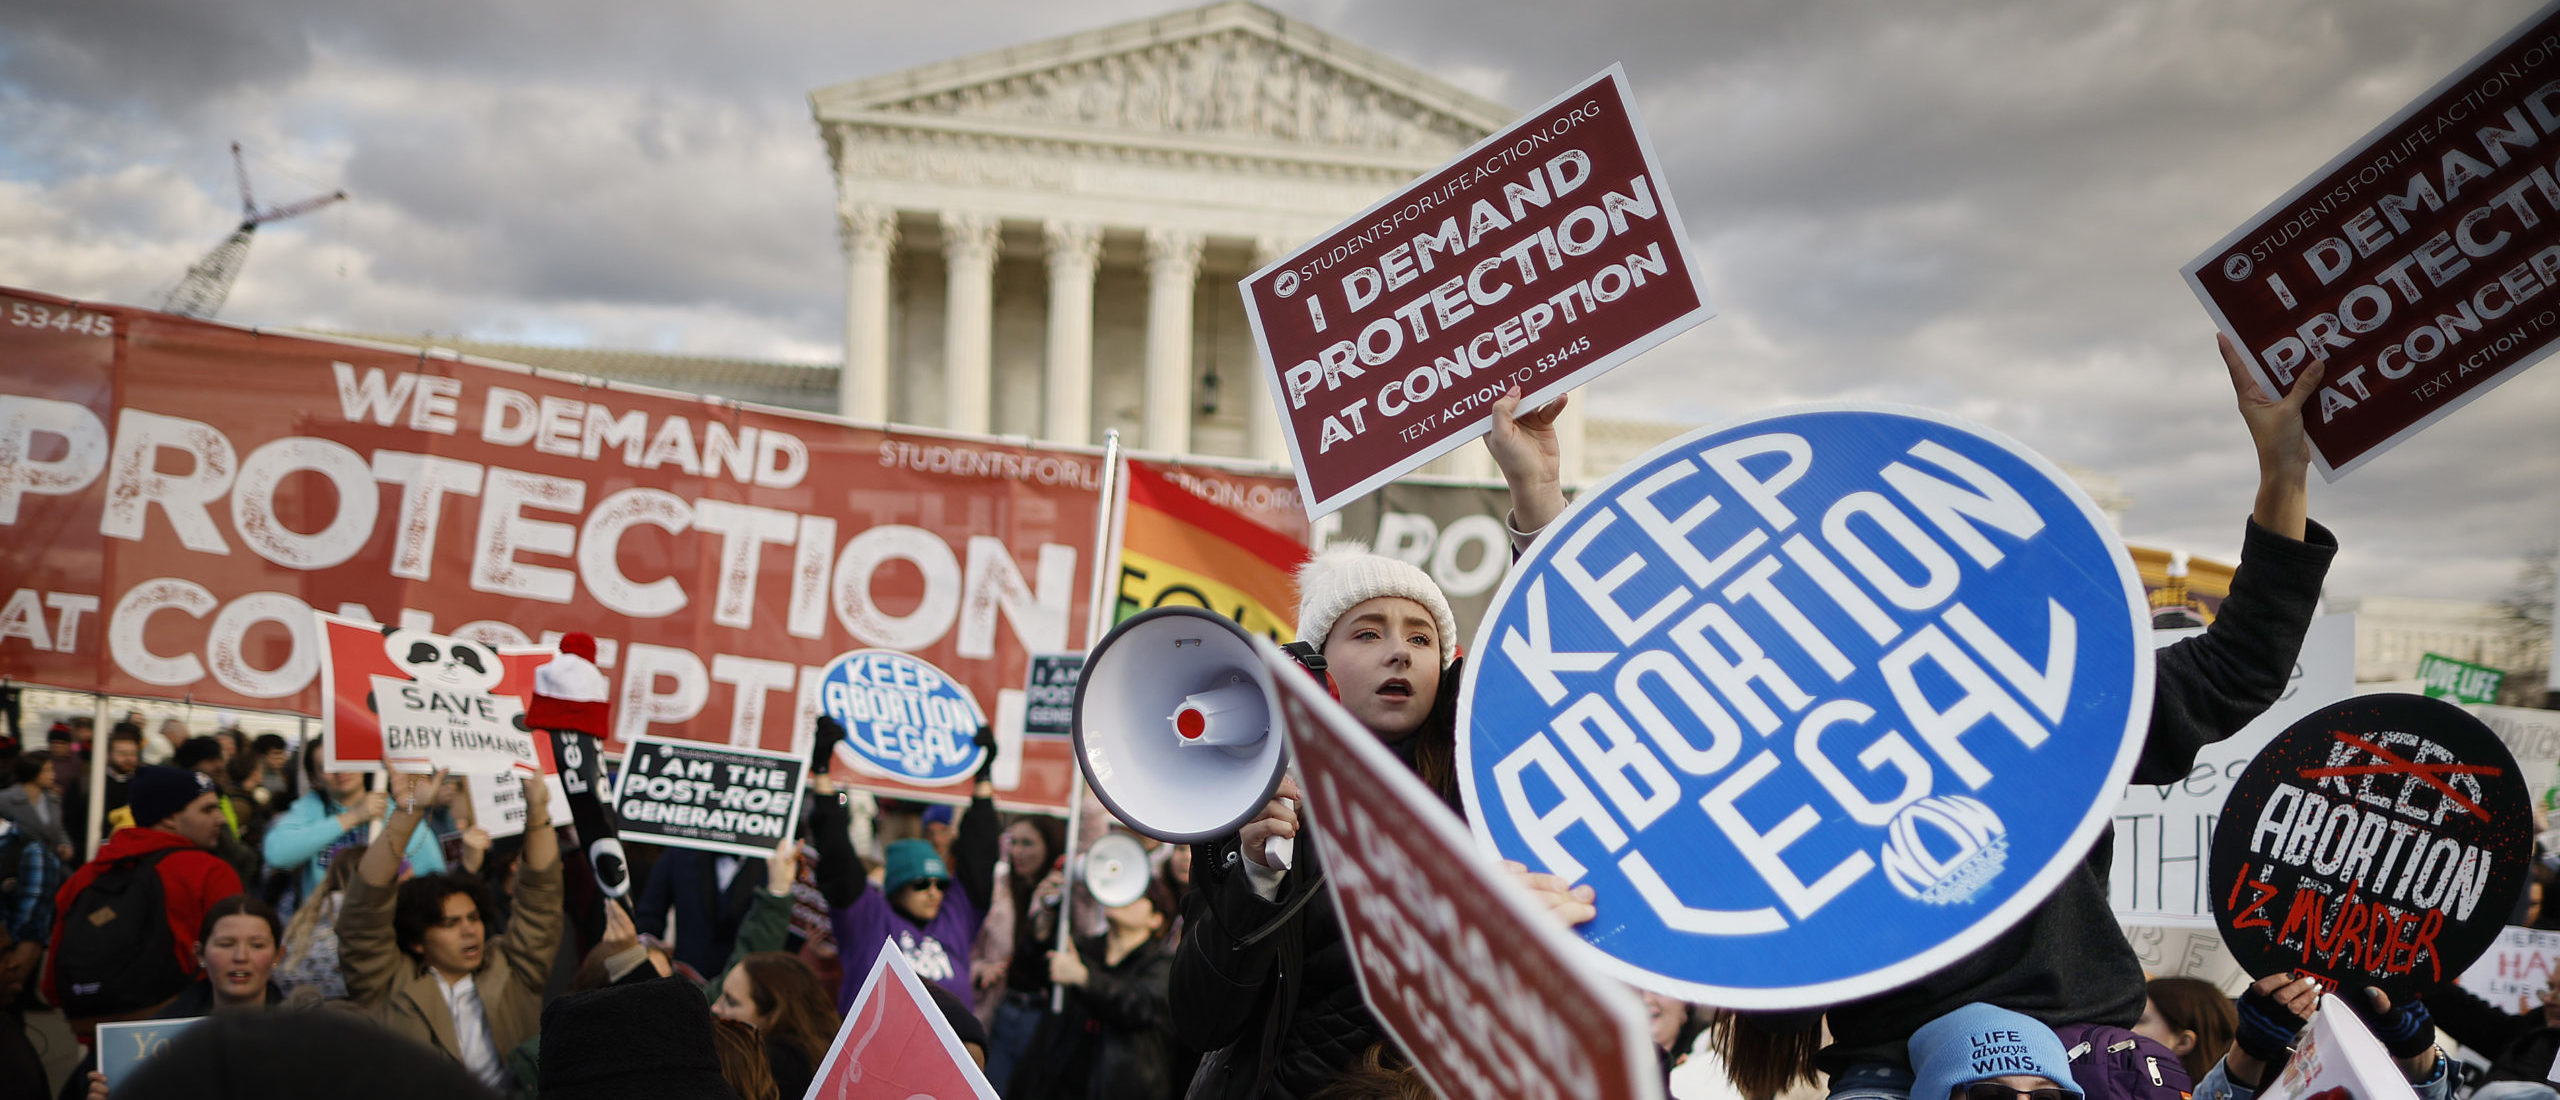 WASHINGTON, DC - JANUARY 20: Anti-abortion and abortion rights activists protest during the 50th annual March for Life rally in front of the U.S. Supreme Court on January 20, 2023 in Washington, DC. Anti-abortion activists attended the annual march to mark the first to occur in a “post-Roe nation” since the Supreme Court's Dobbs vs Jackson Women's Health ruling which overturned 50 years of federal protections for abortion healthcare. (Photo by Chip Somodevilla/Getty Images)